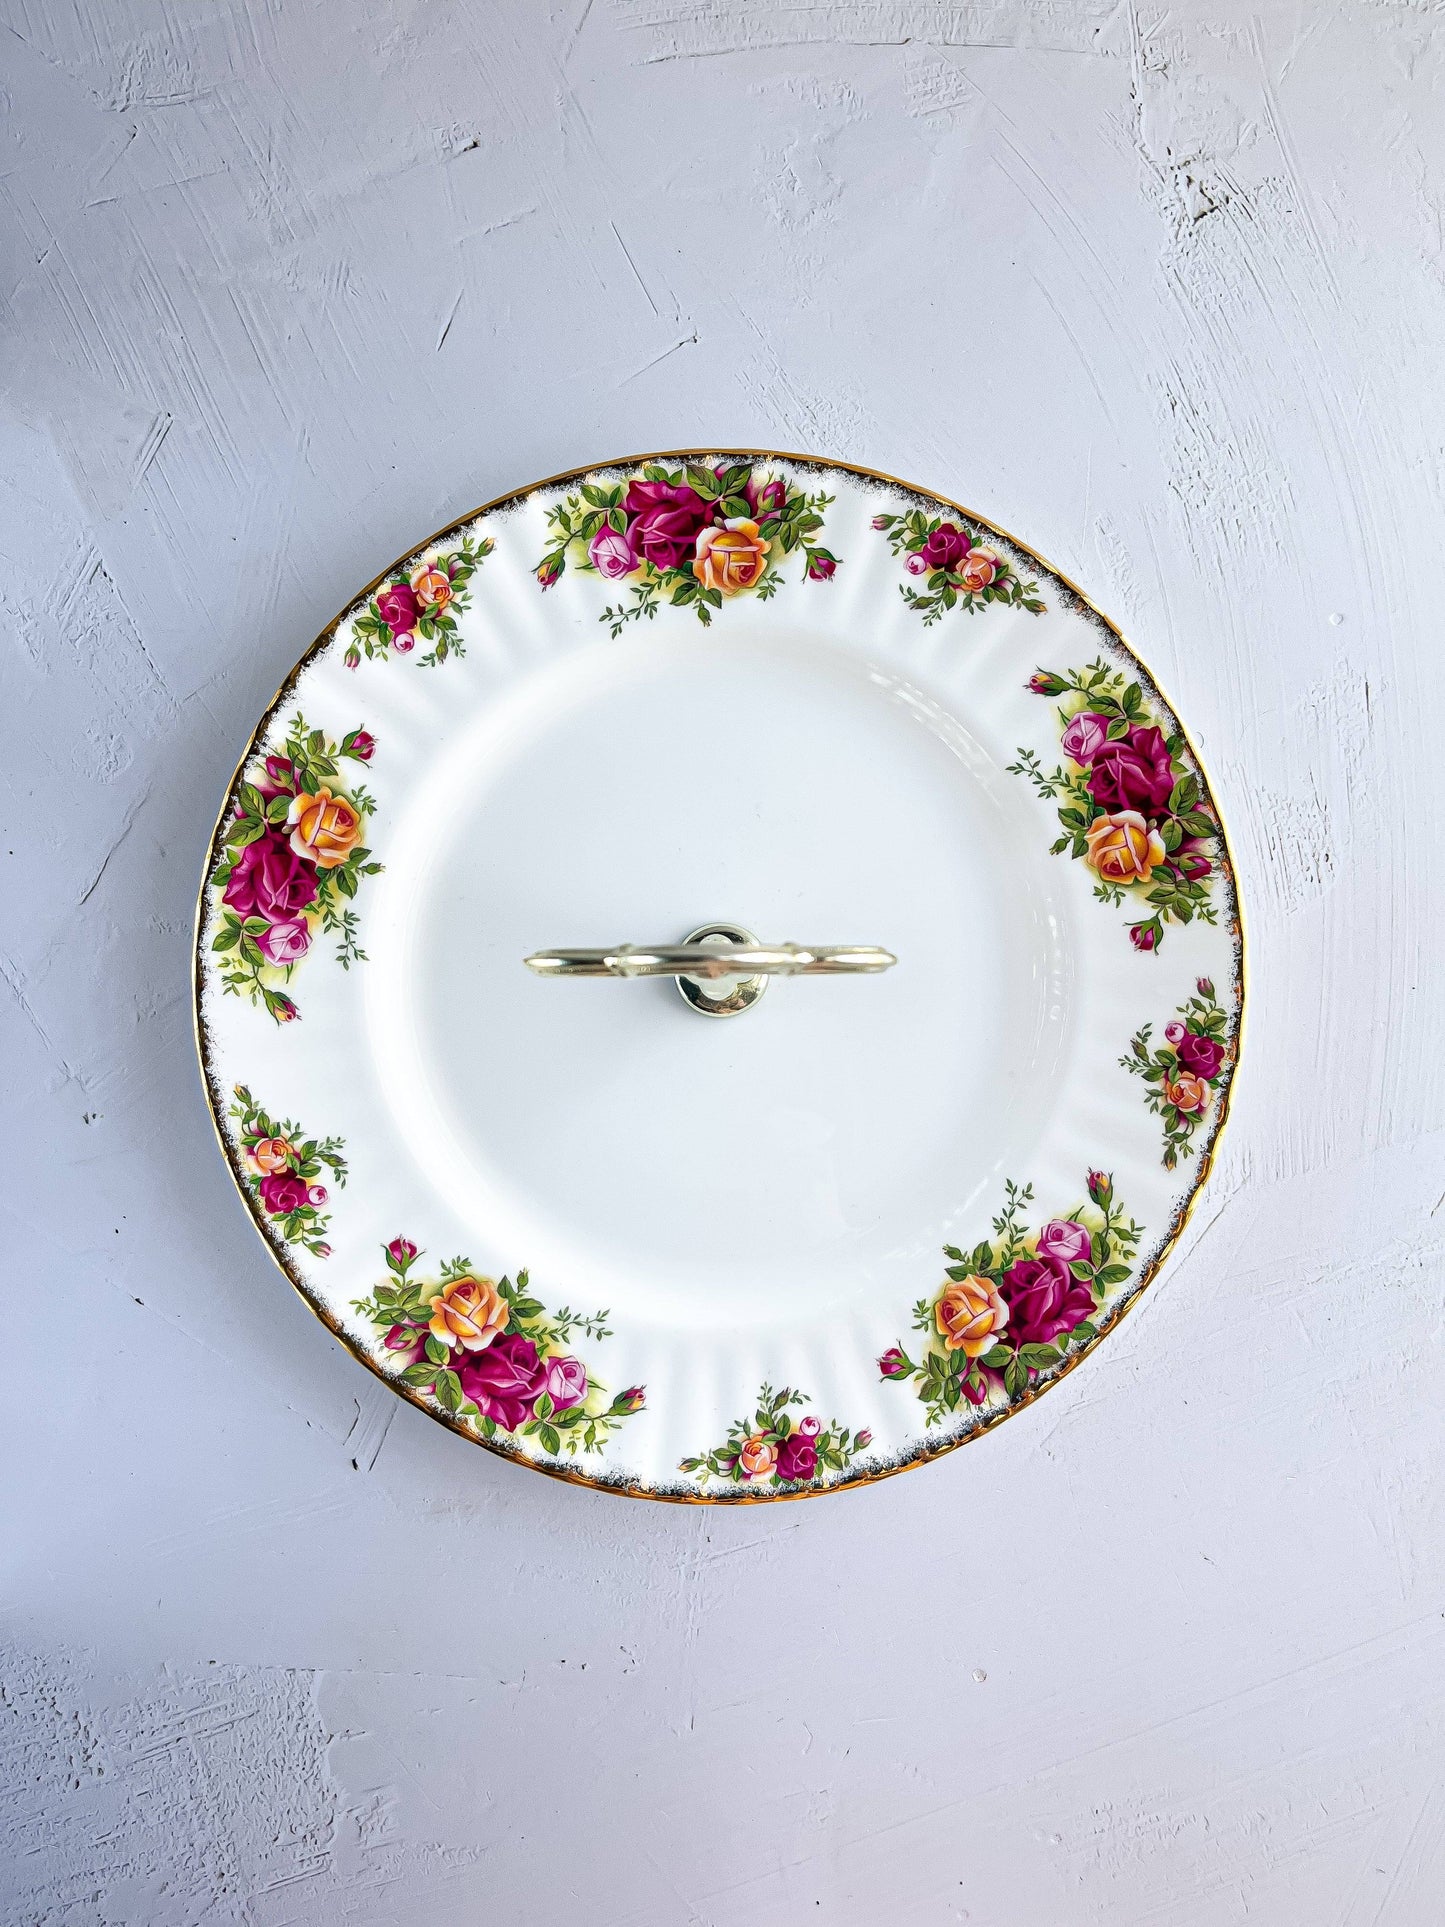 Royal Albert Round Serving Plate with Handle - ‘Old Country Roses’ Collection - SOSC Home